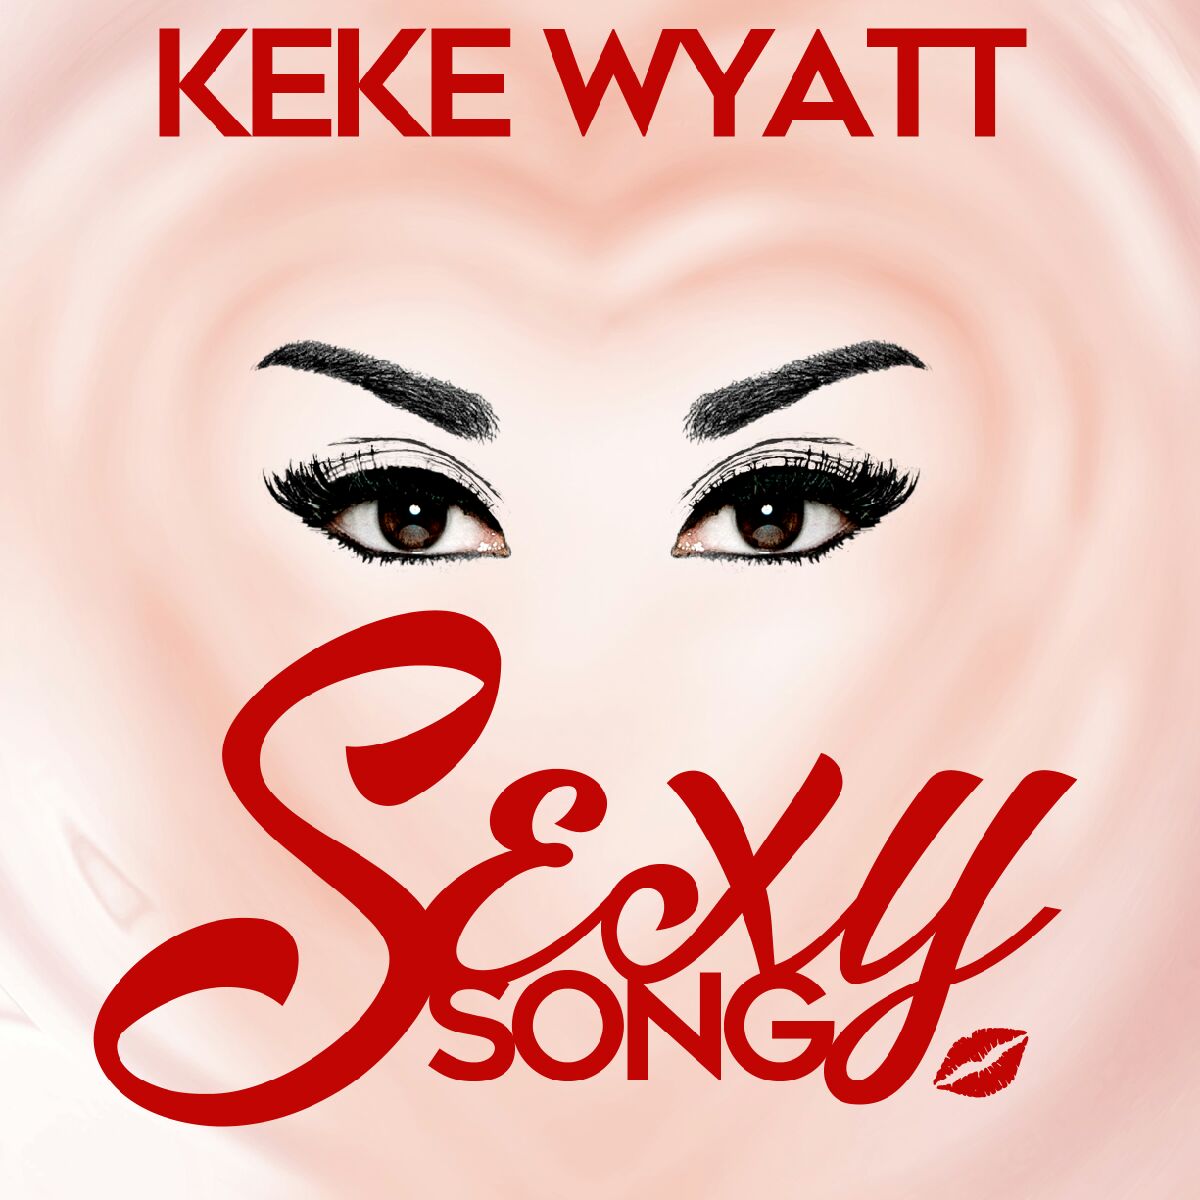 Keke Wyatt Releases "Sexy Song" Video, Announces Upcoming Album "Rated Love"